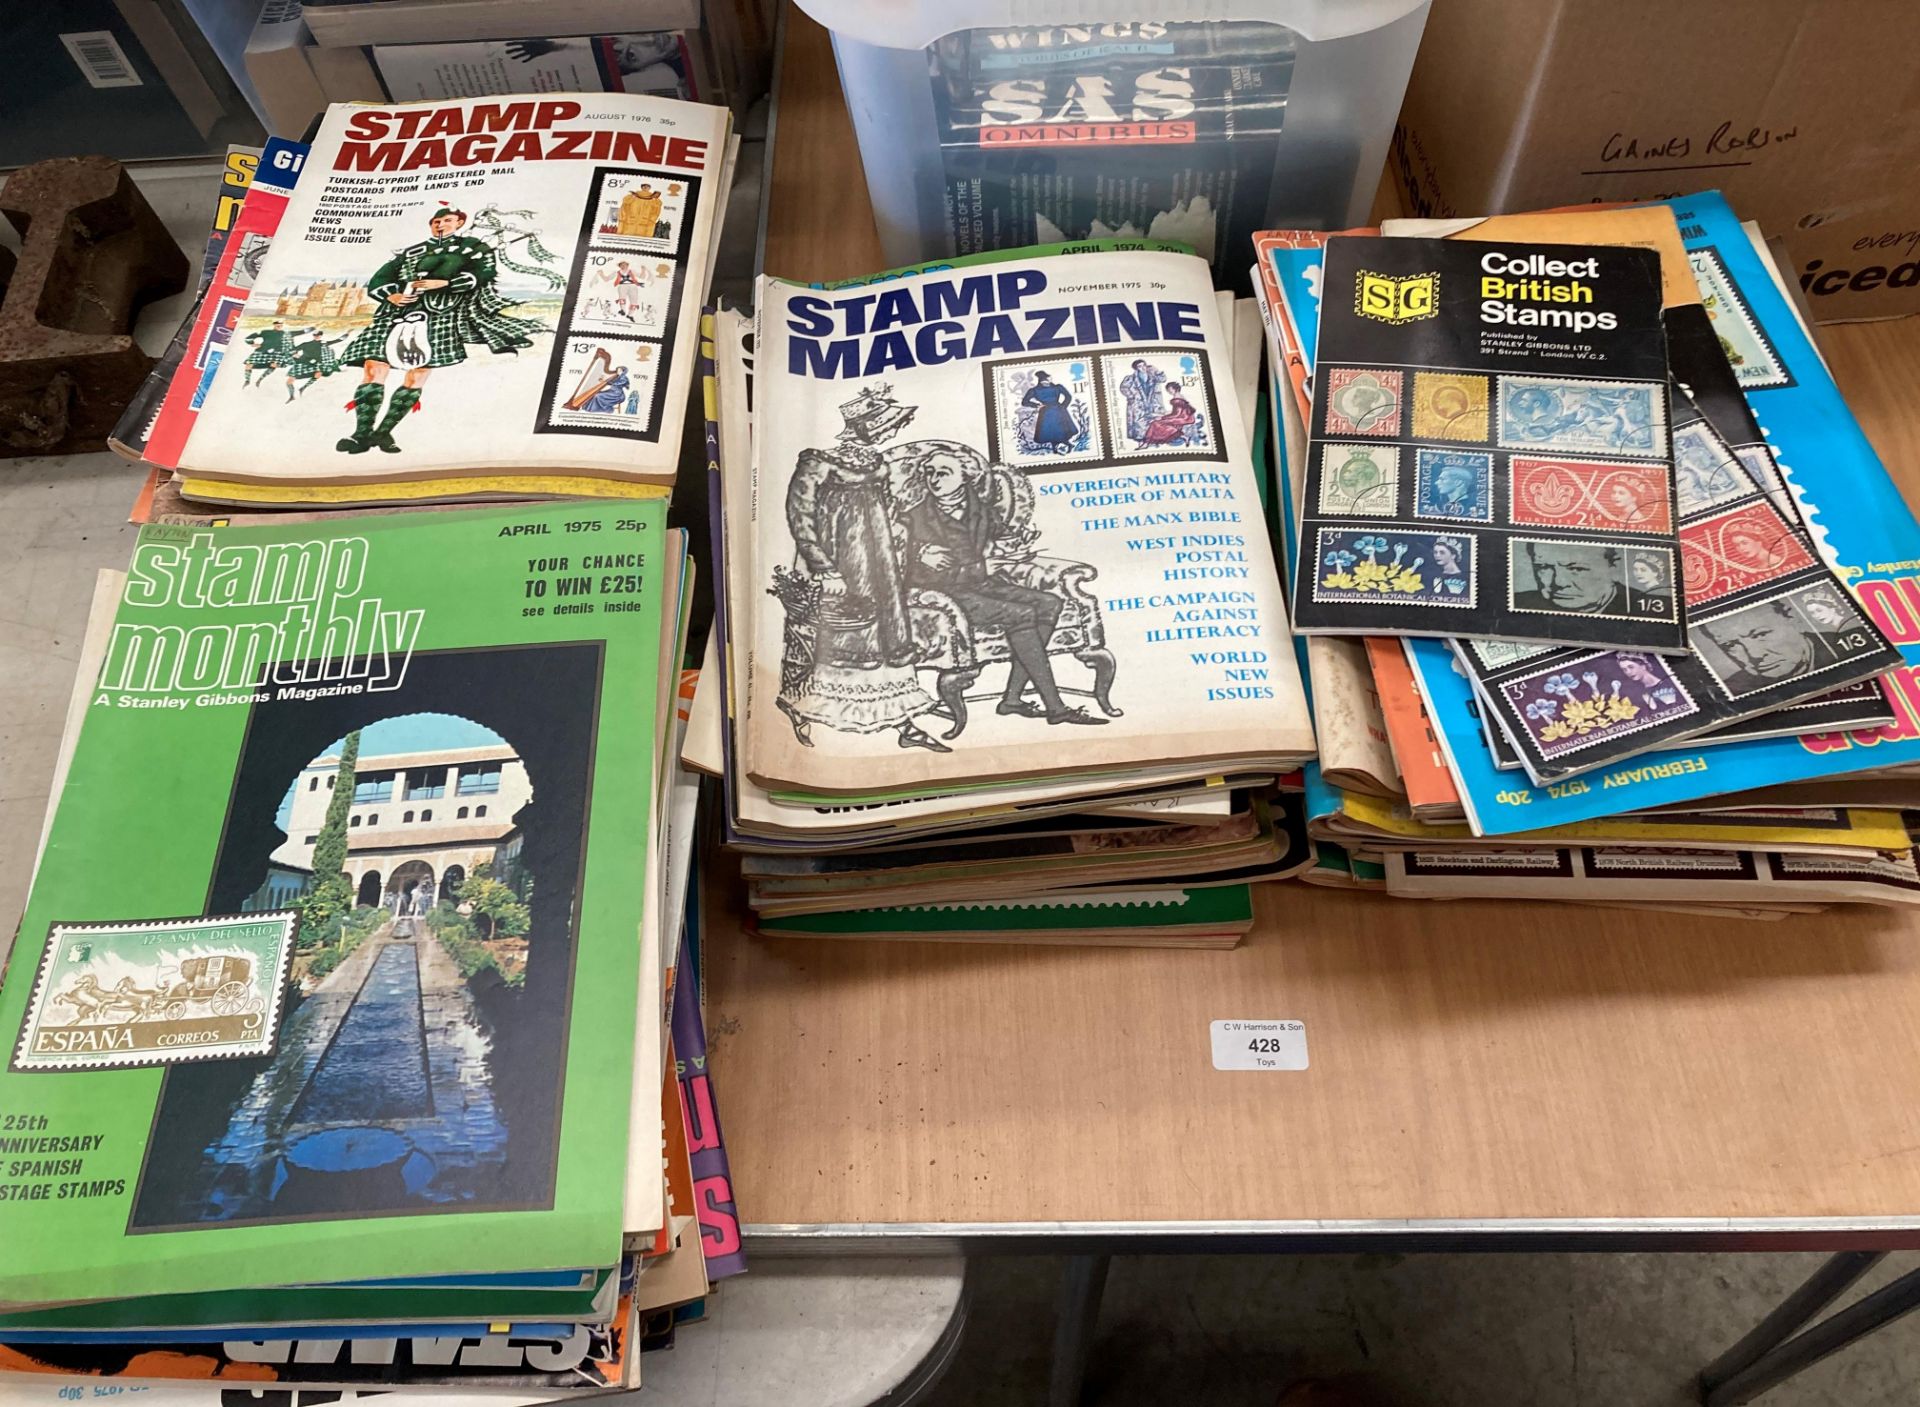 Contents to four stacks - Stamp collecting magazines.